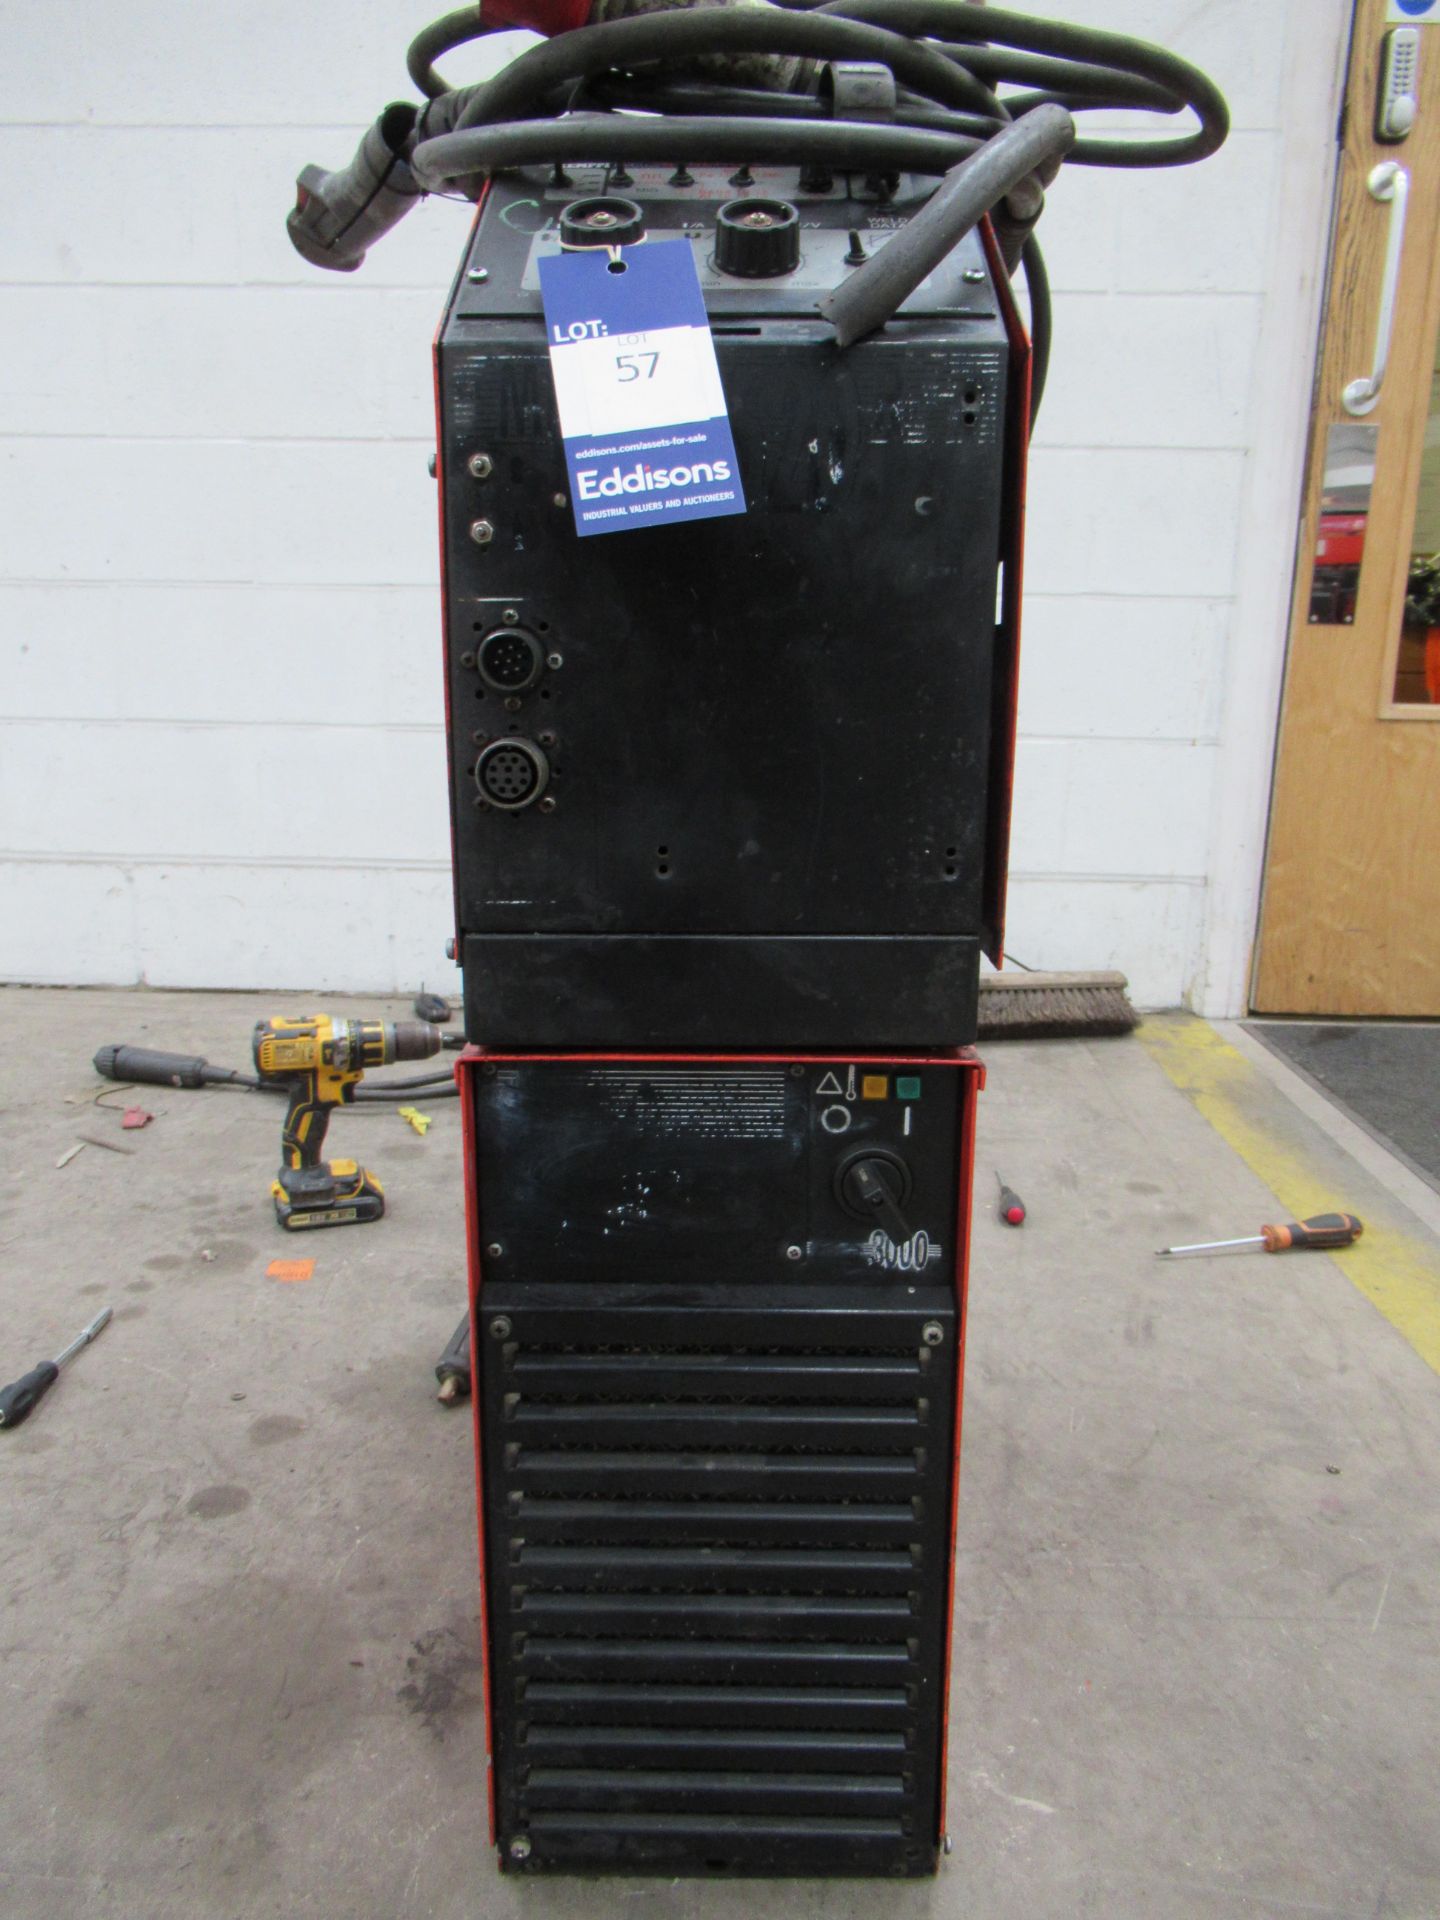 Kemppi ML synergic Promig 520R welder with Kemppi Pro 3000 power source with torch